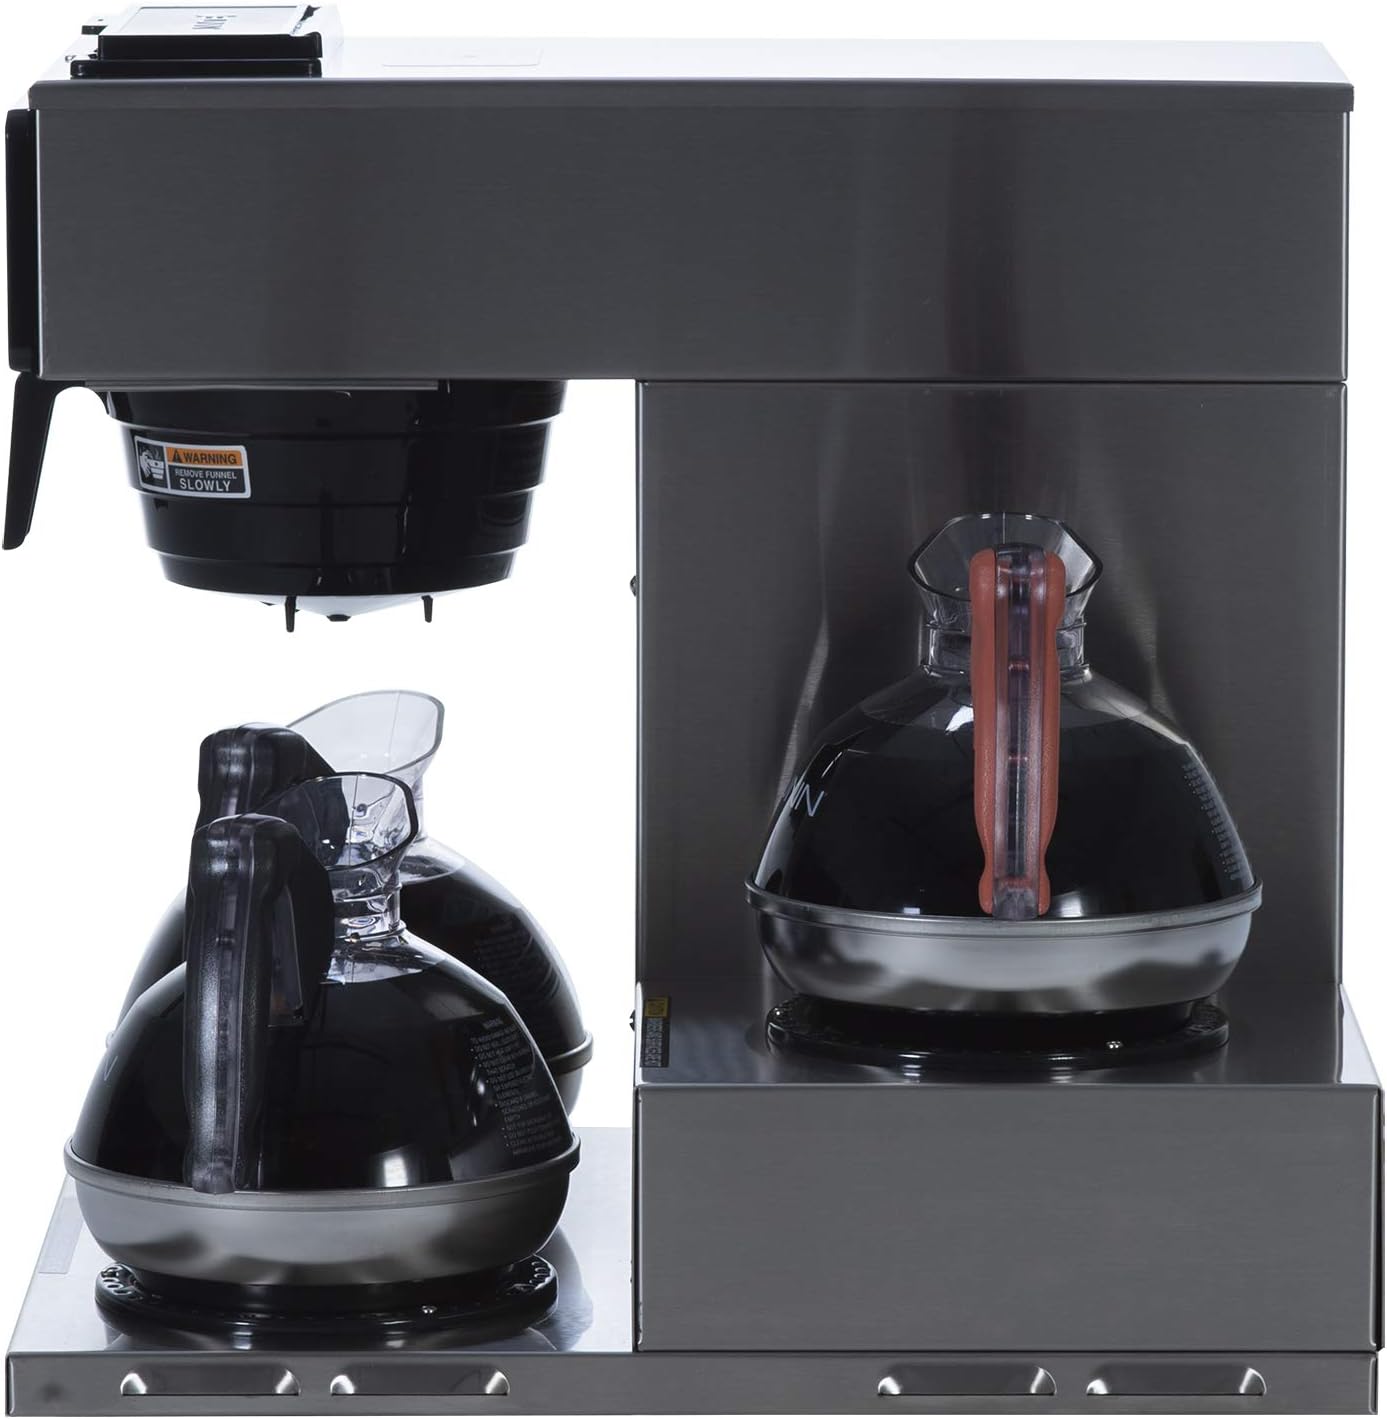 BUNN VP17-3, 12-Cup Low Profile Pourover Commercial Coffee Maker: A Reliable Brewing Solution